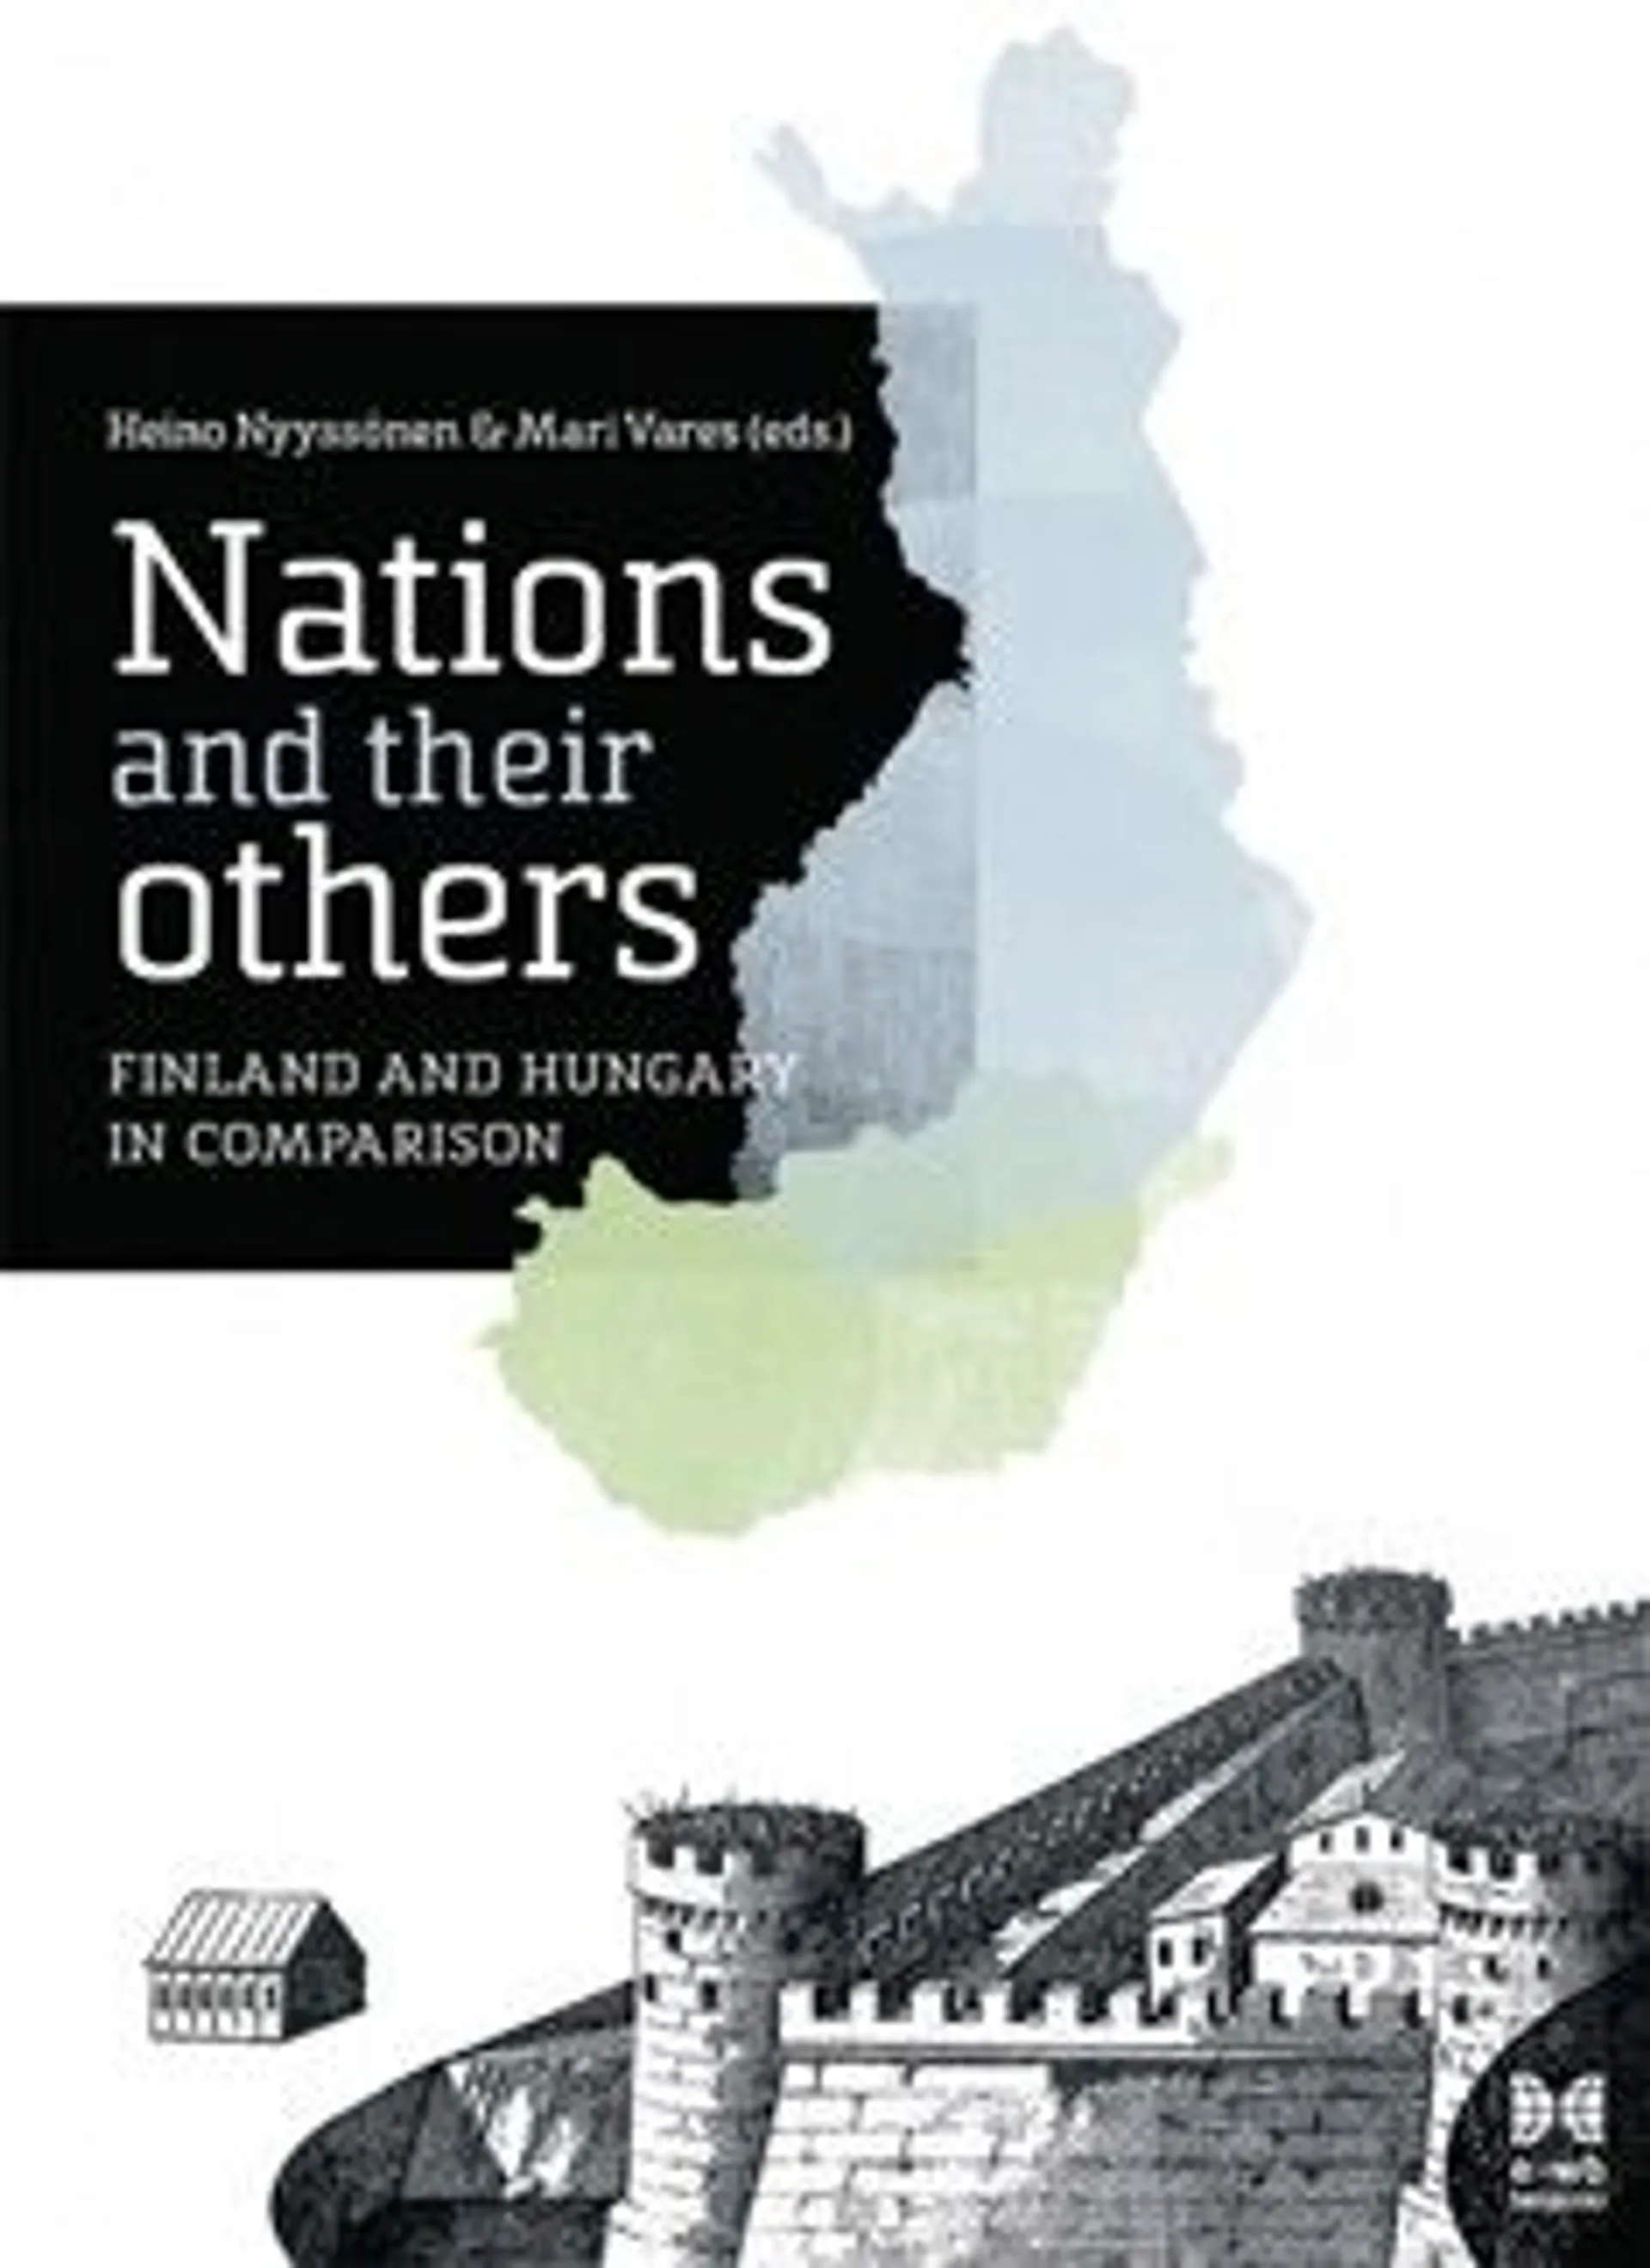 Nations and their others